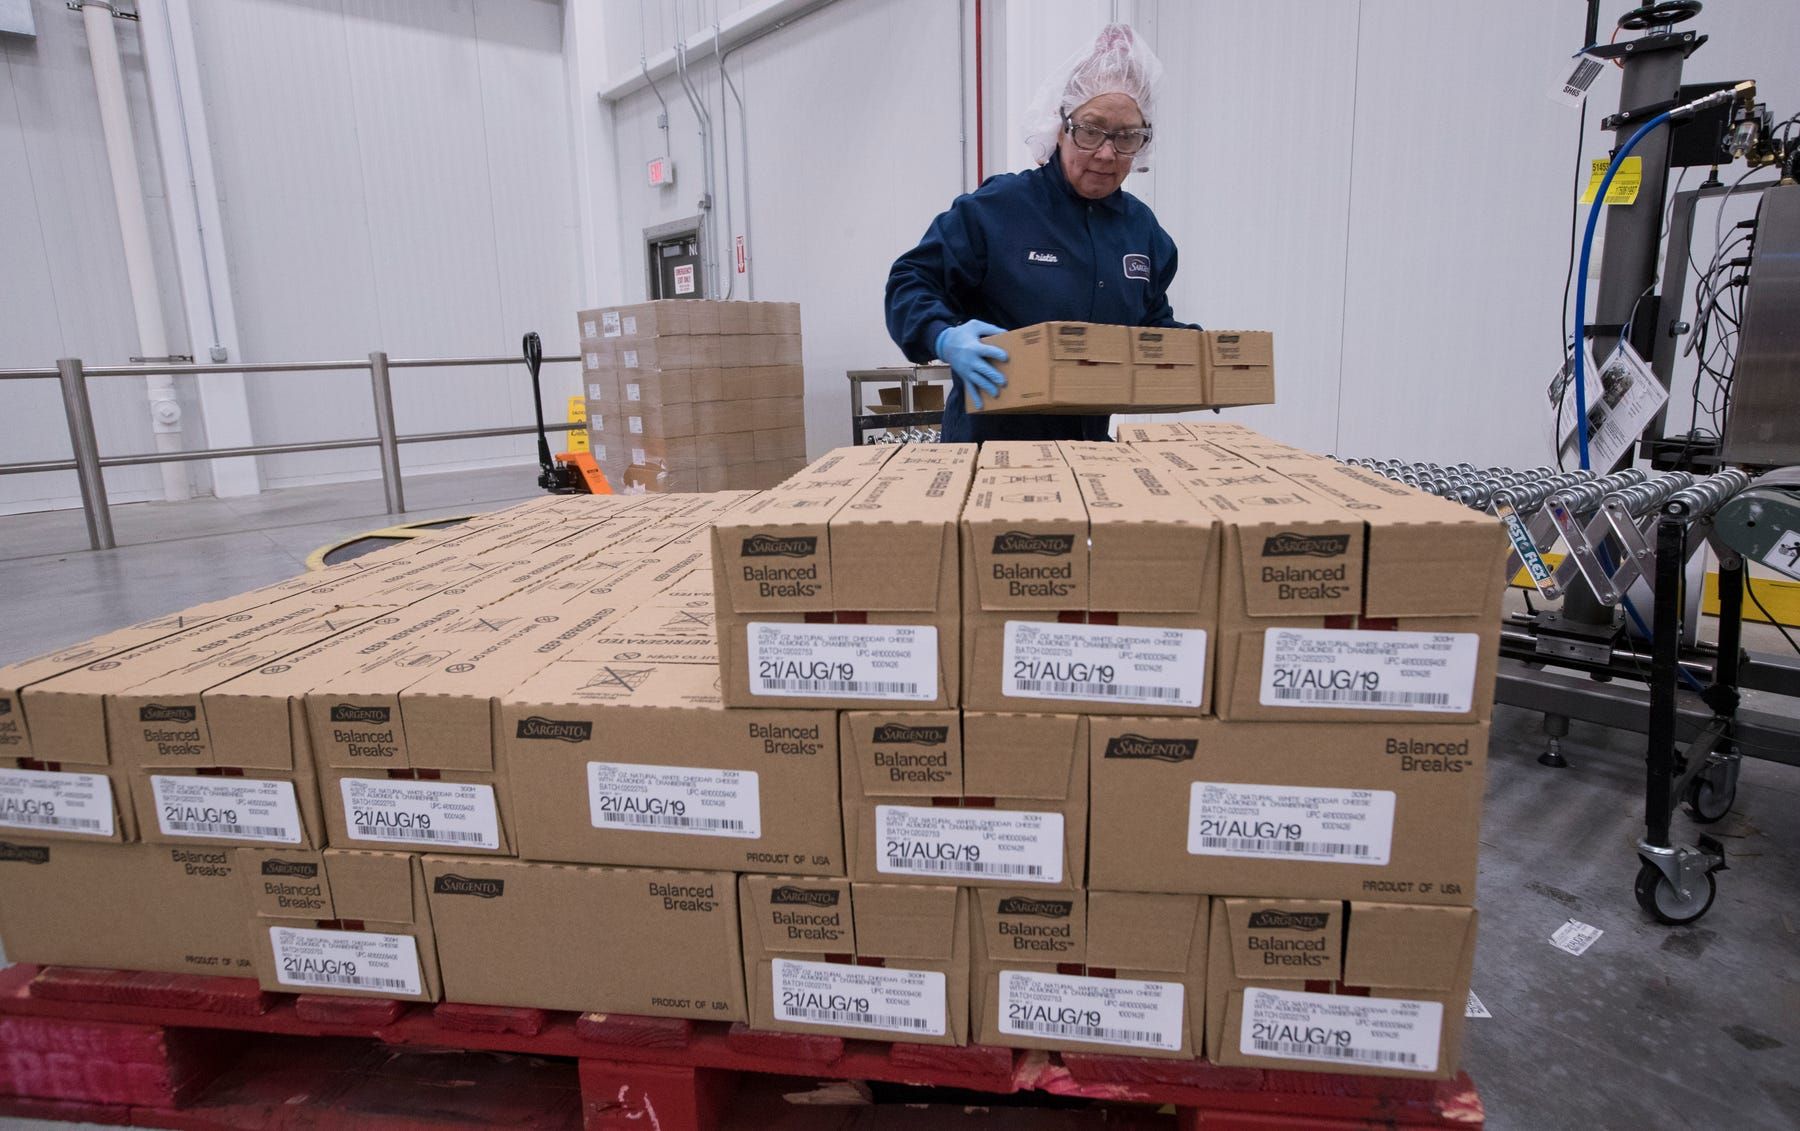 Kathy Griffey, top, and Kristin Geary, bottom right, work on an assembly line packaging Balanced Breaks snacks at Sargento Foods Inc. The company employs about 2,300 people in Wisconsin. Image Courtesy of Mark Hoffman. United States, 2019.